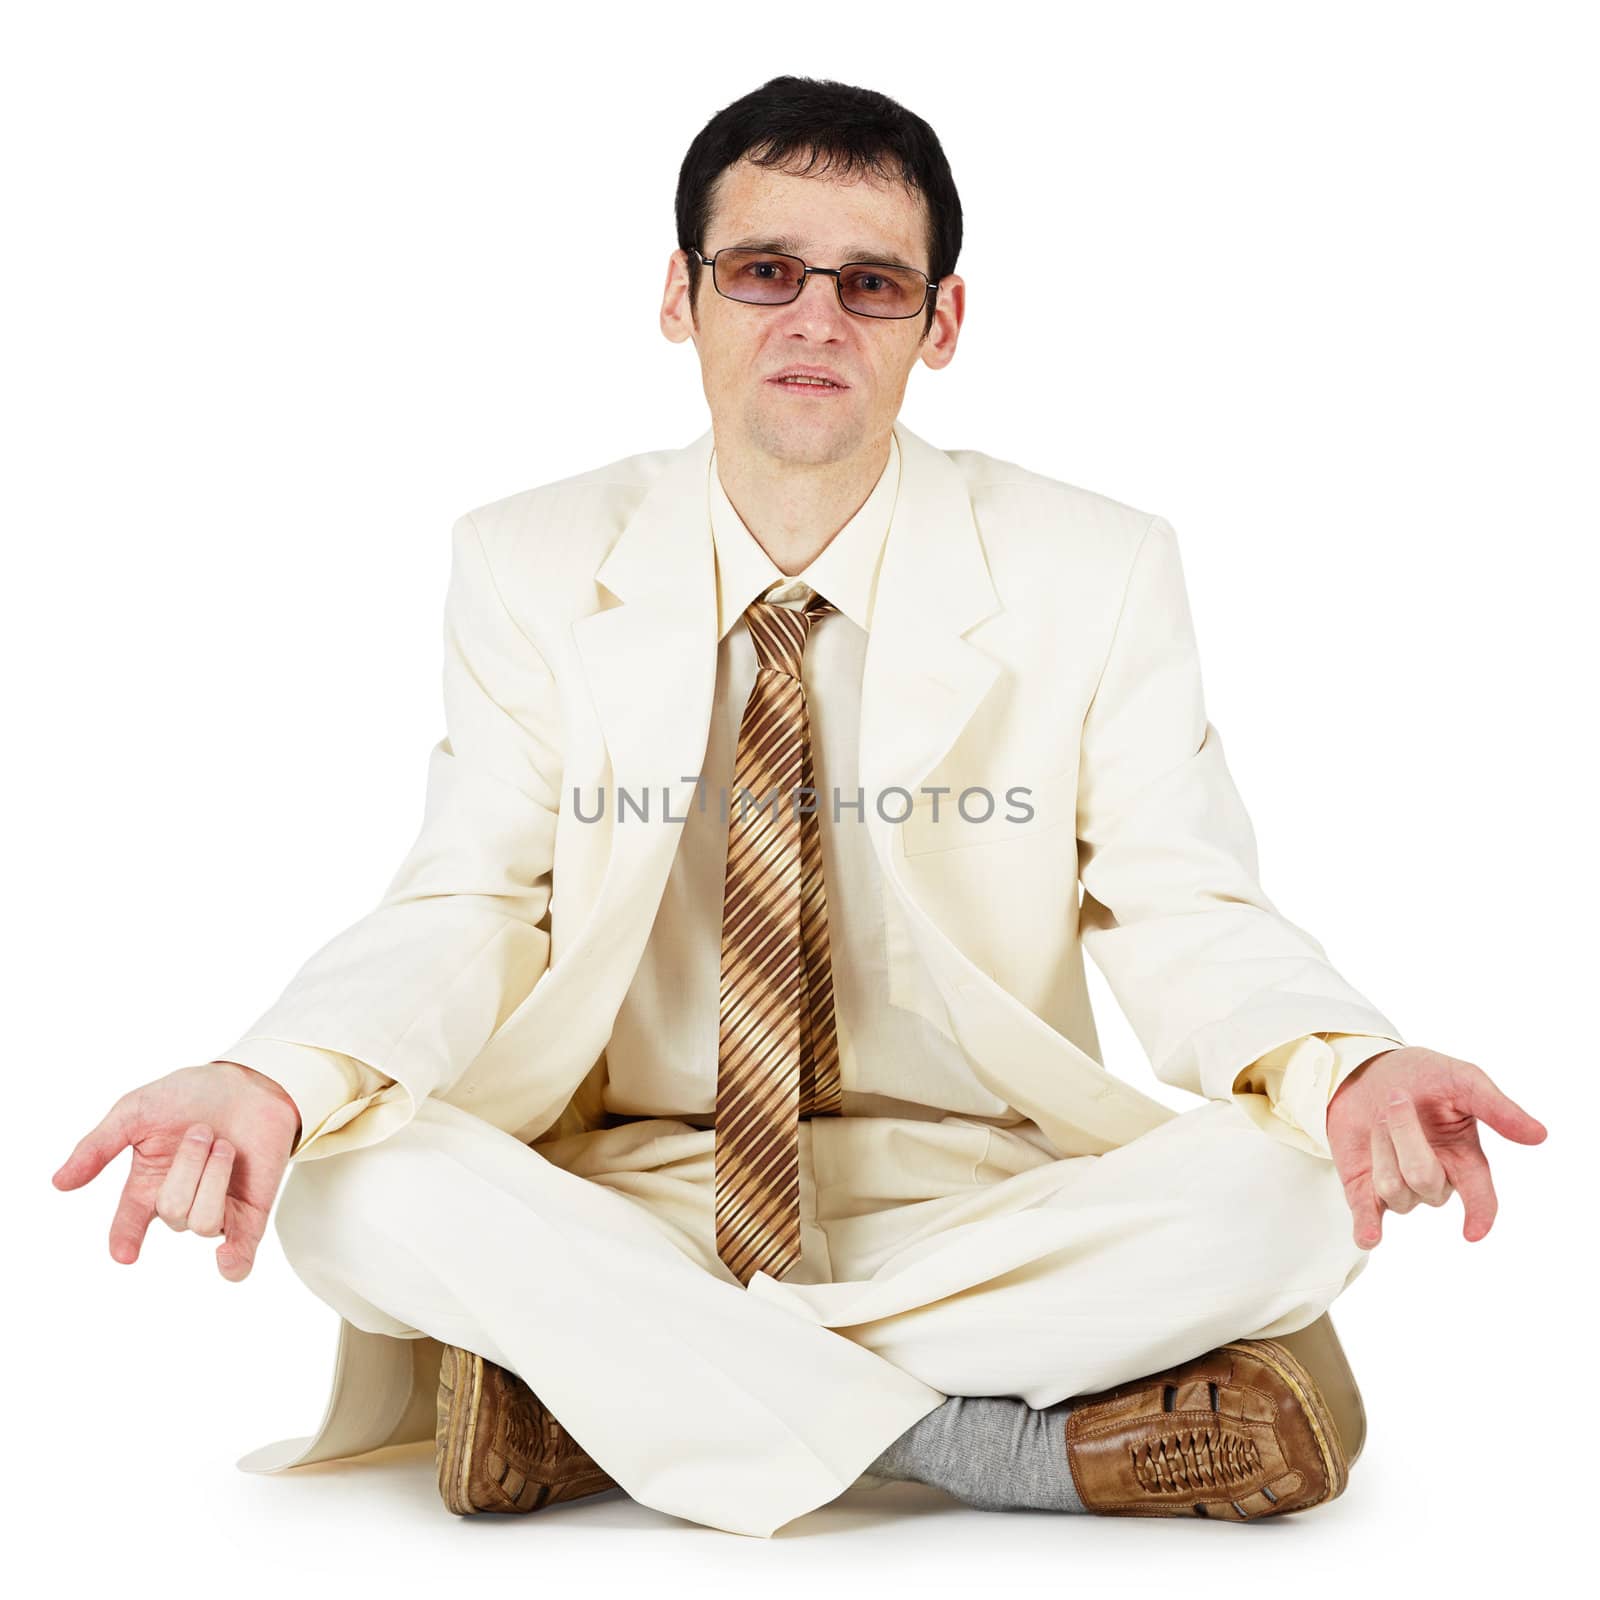 Cool guy in white suit sitting on a white background